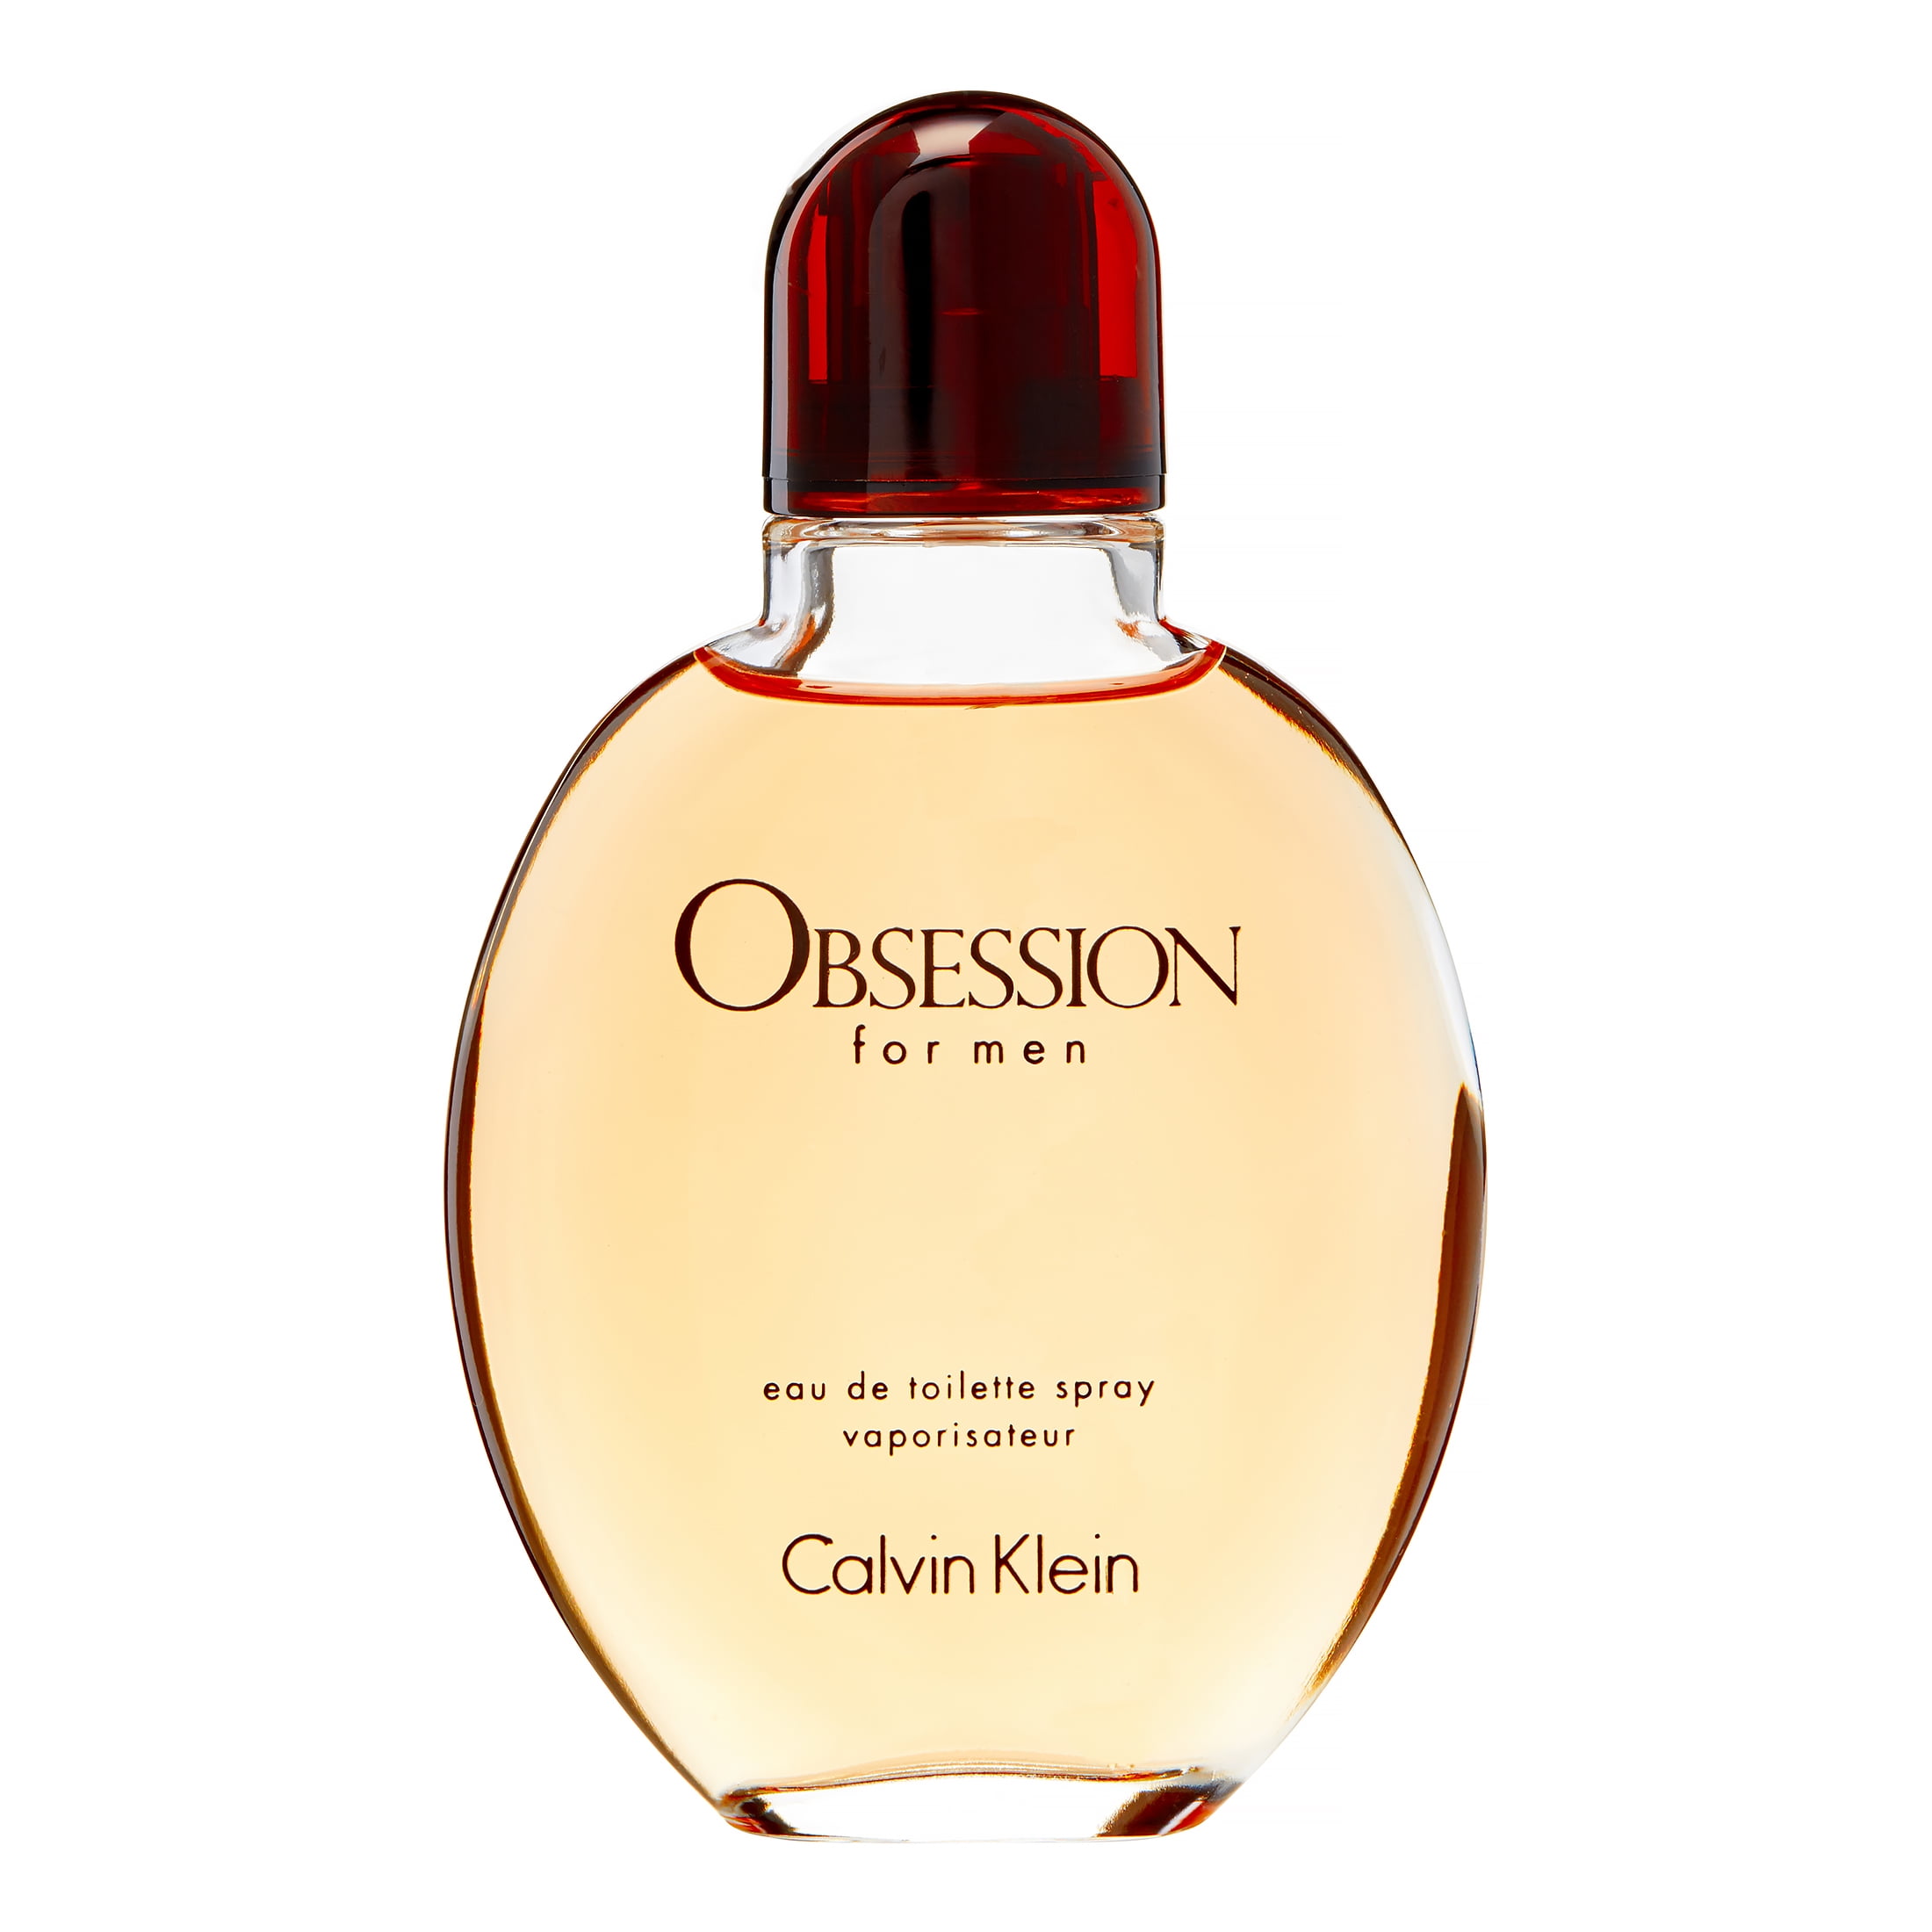 ck obsession cologne